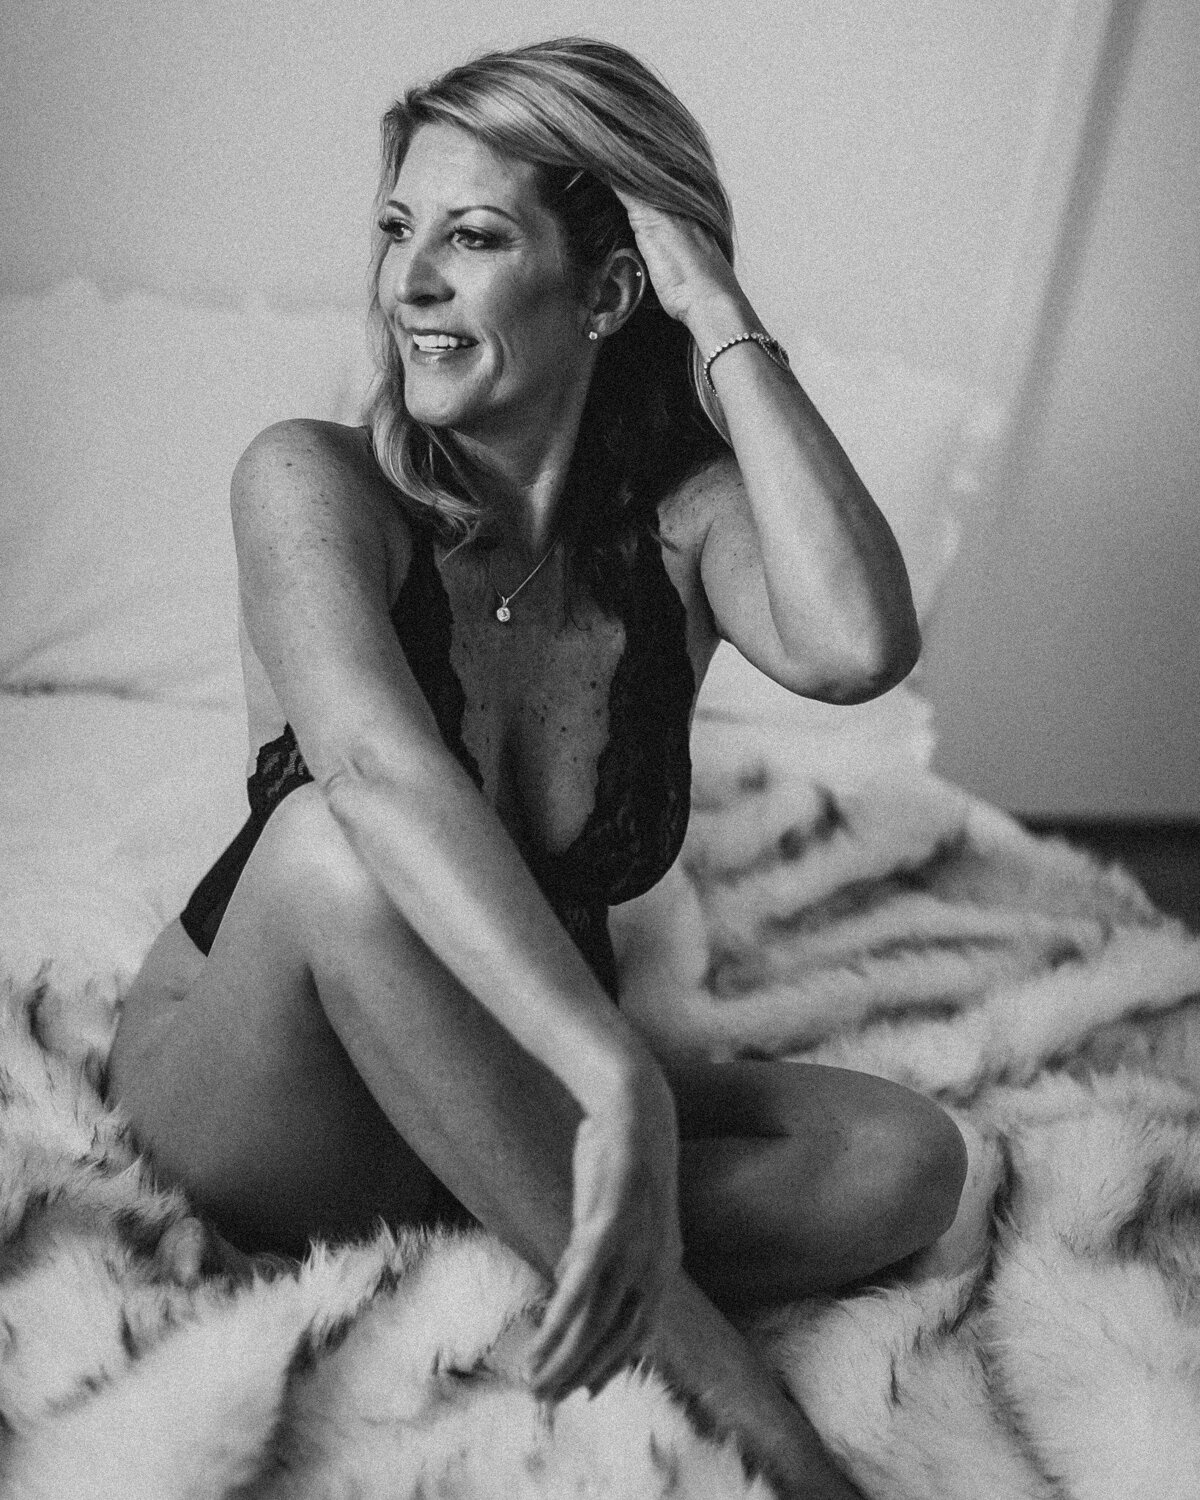 Reveal your inner radiance with our Austin boudoir sessions.